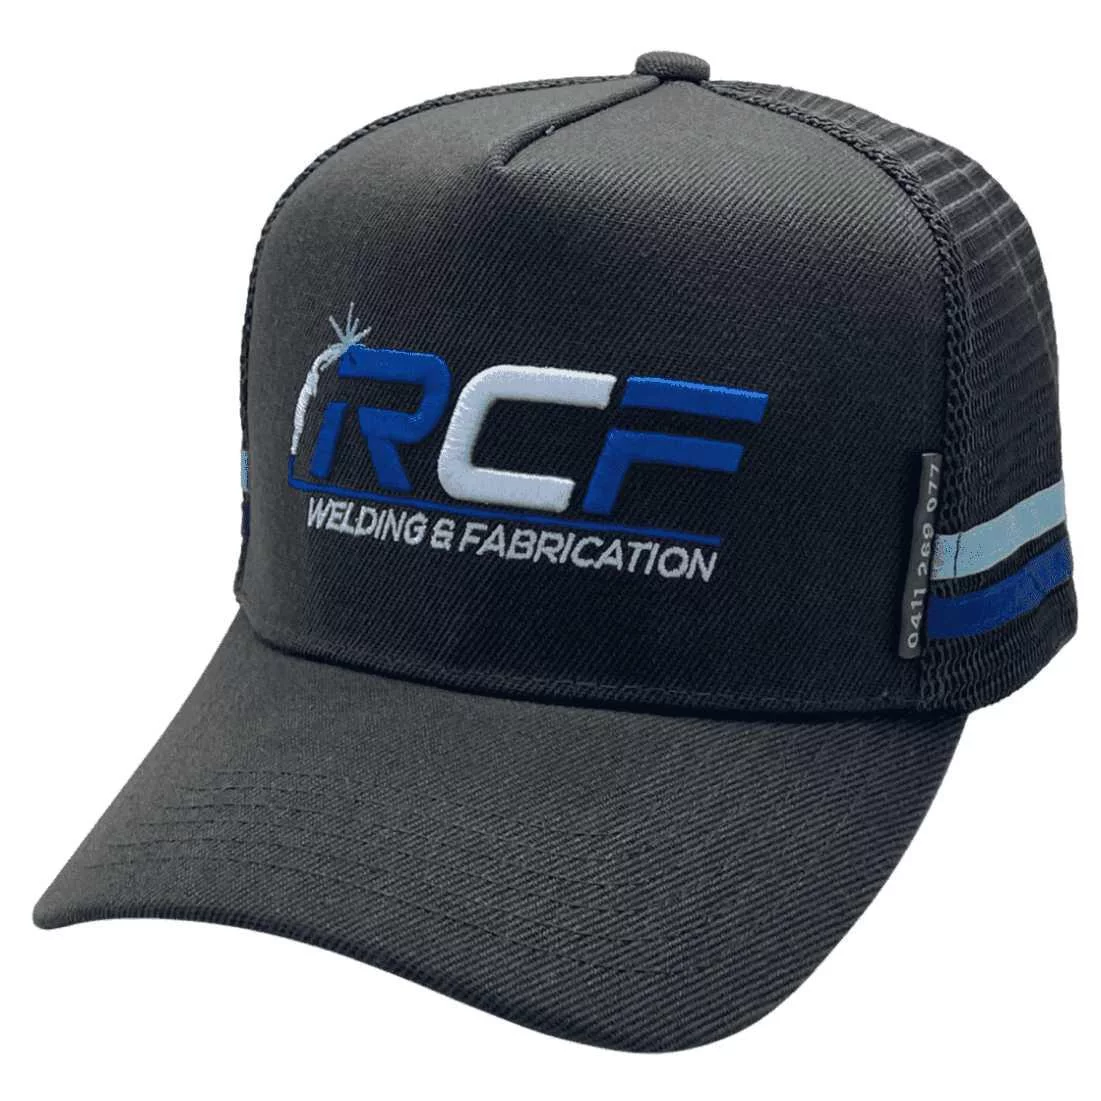 RCF Welding and Fabrication Glenrowan Vic HP Midrange Aussie Trucker Hat with Australian Head Fit Crown and Two Sidebands Black Sky Royal